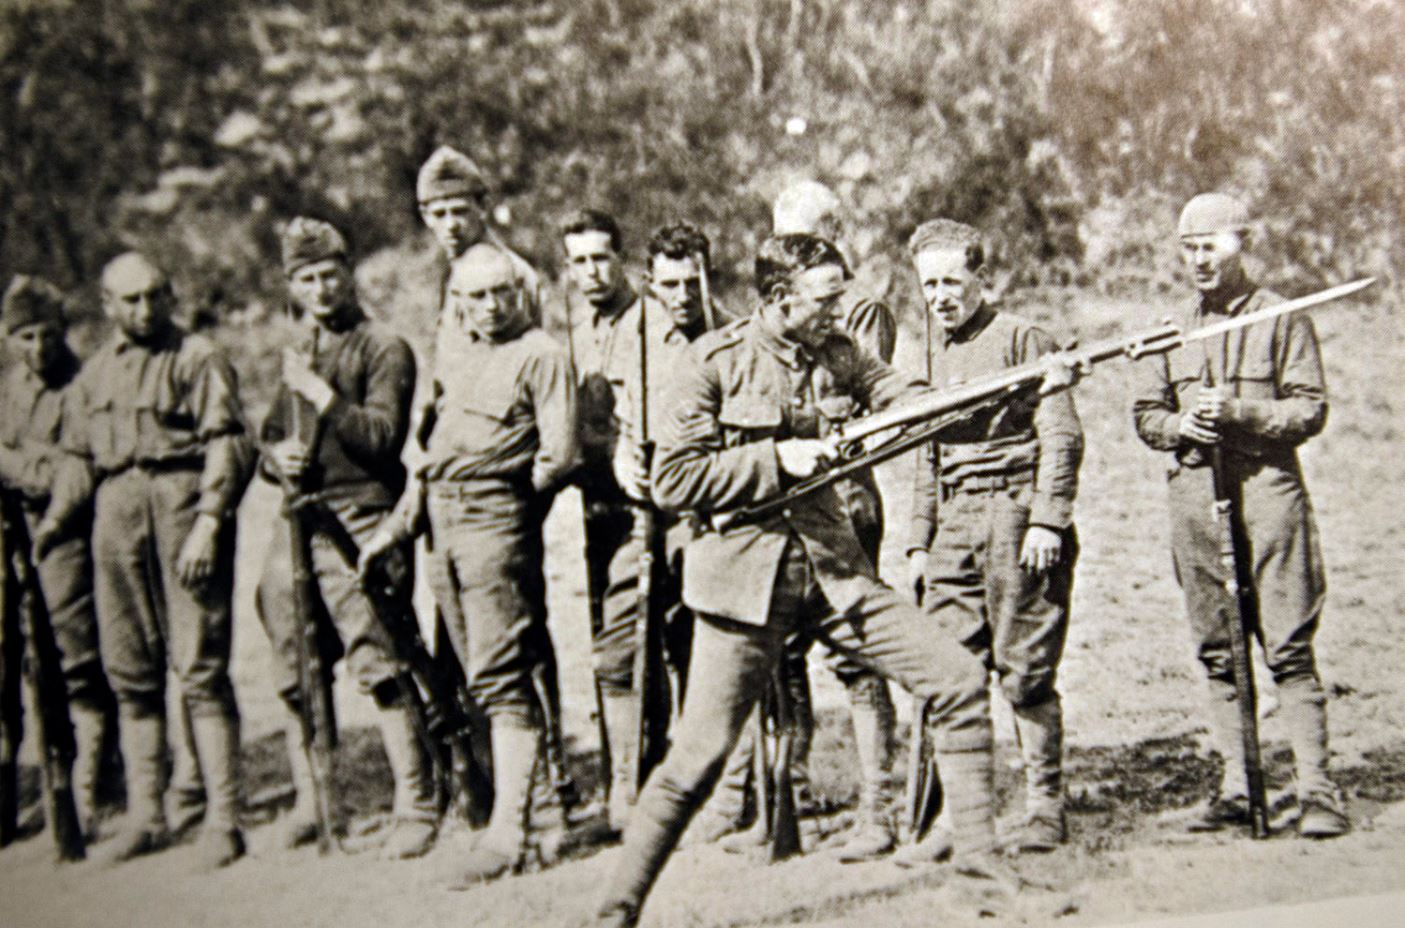 Members of the 80th Infantry Division receive bayonet training from a British non-commissioned officer at Boque Maison, France, April1918. The 80th Division today is an Army Reserve Training Division headquartered in Richmond, Va.